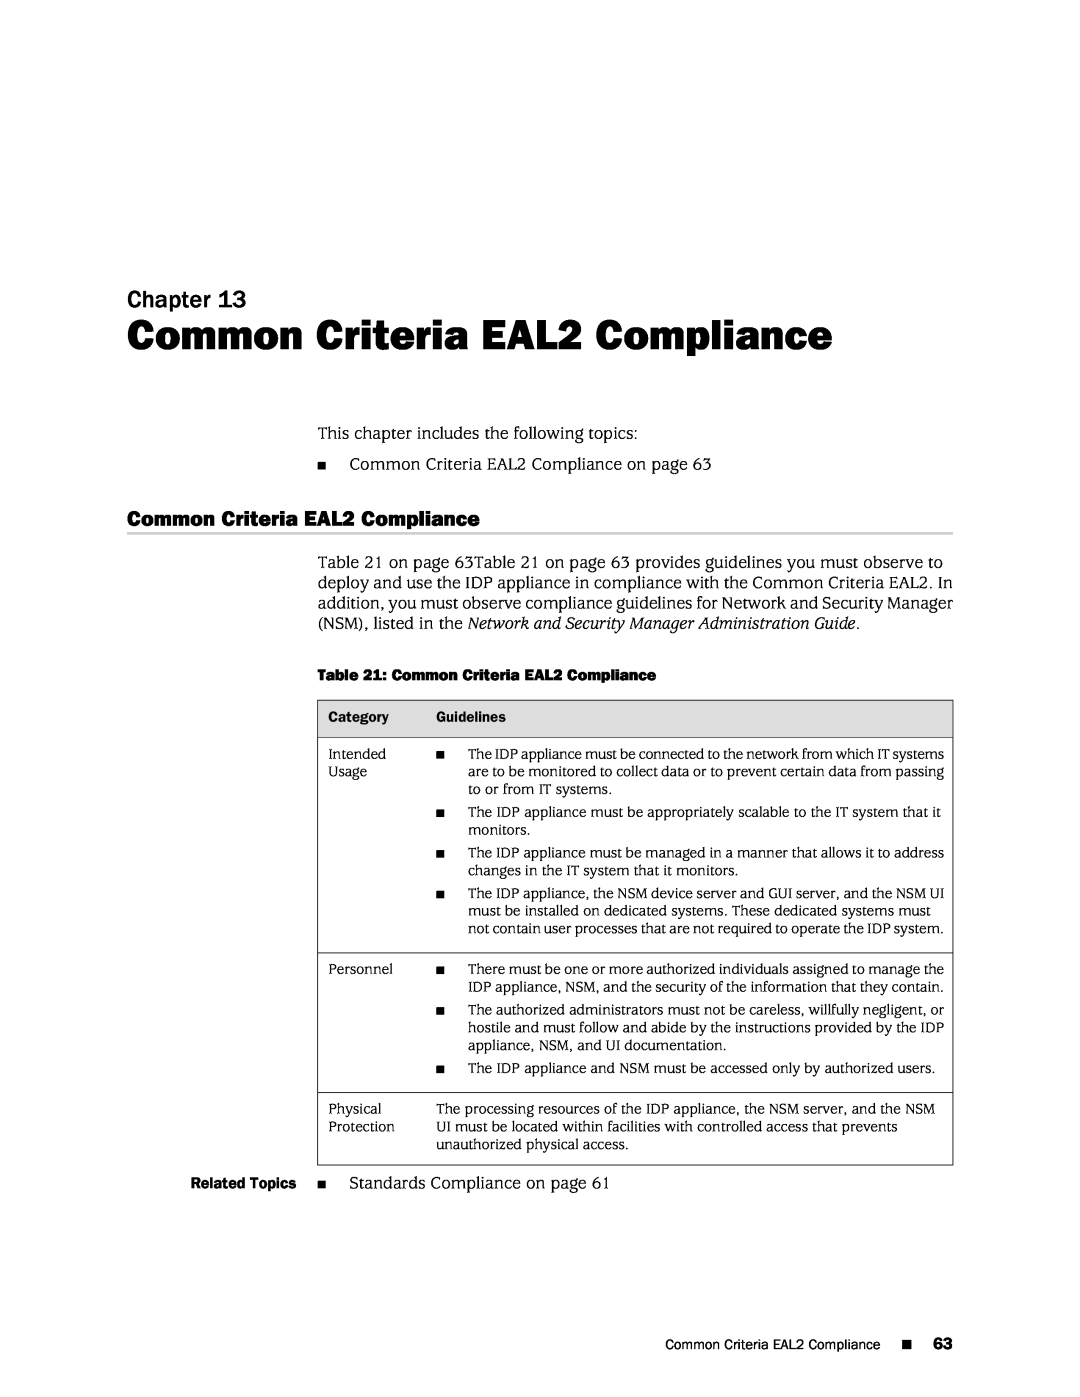 Juniper Networks IDP250 manual Common Criteria EAL2 Compliance, Chapter 